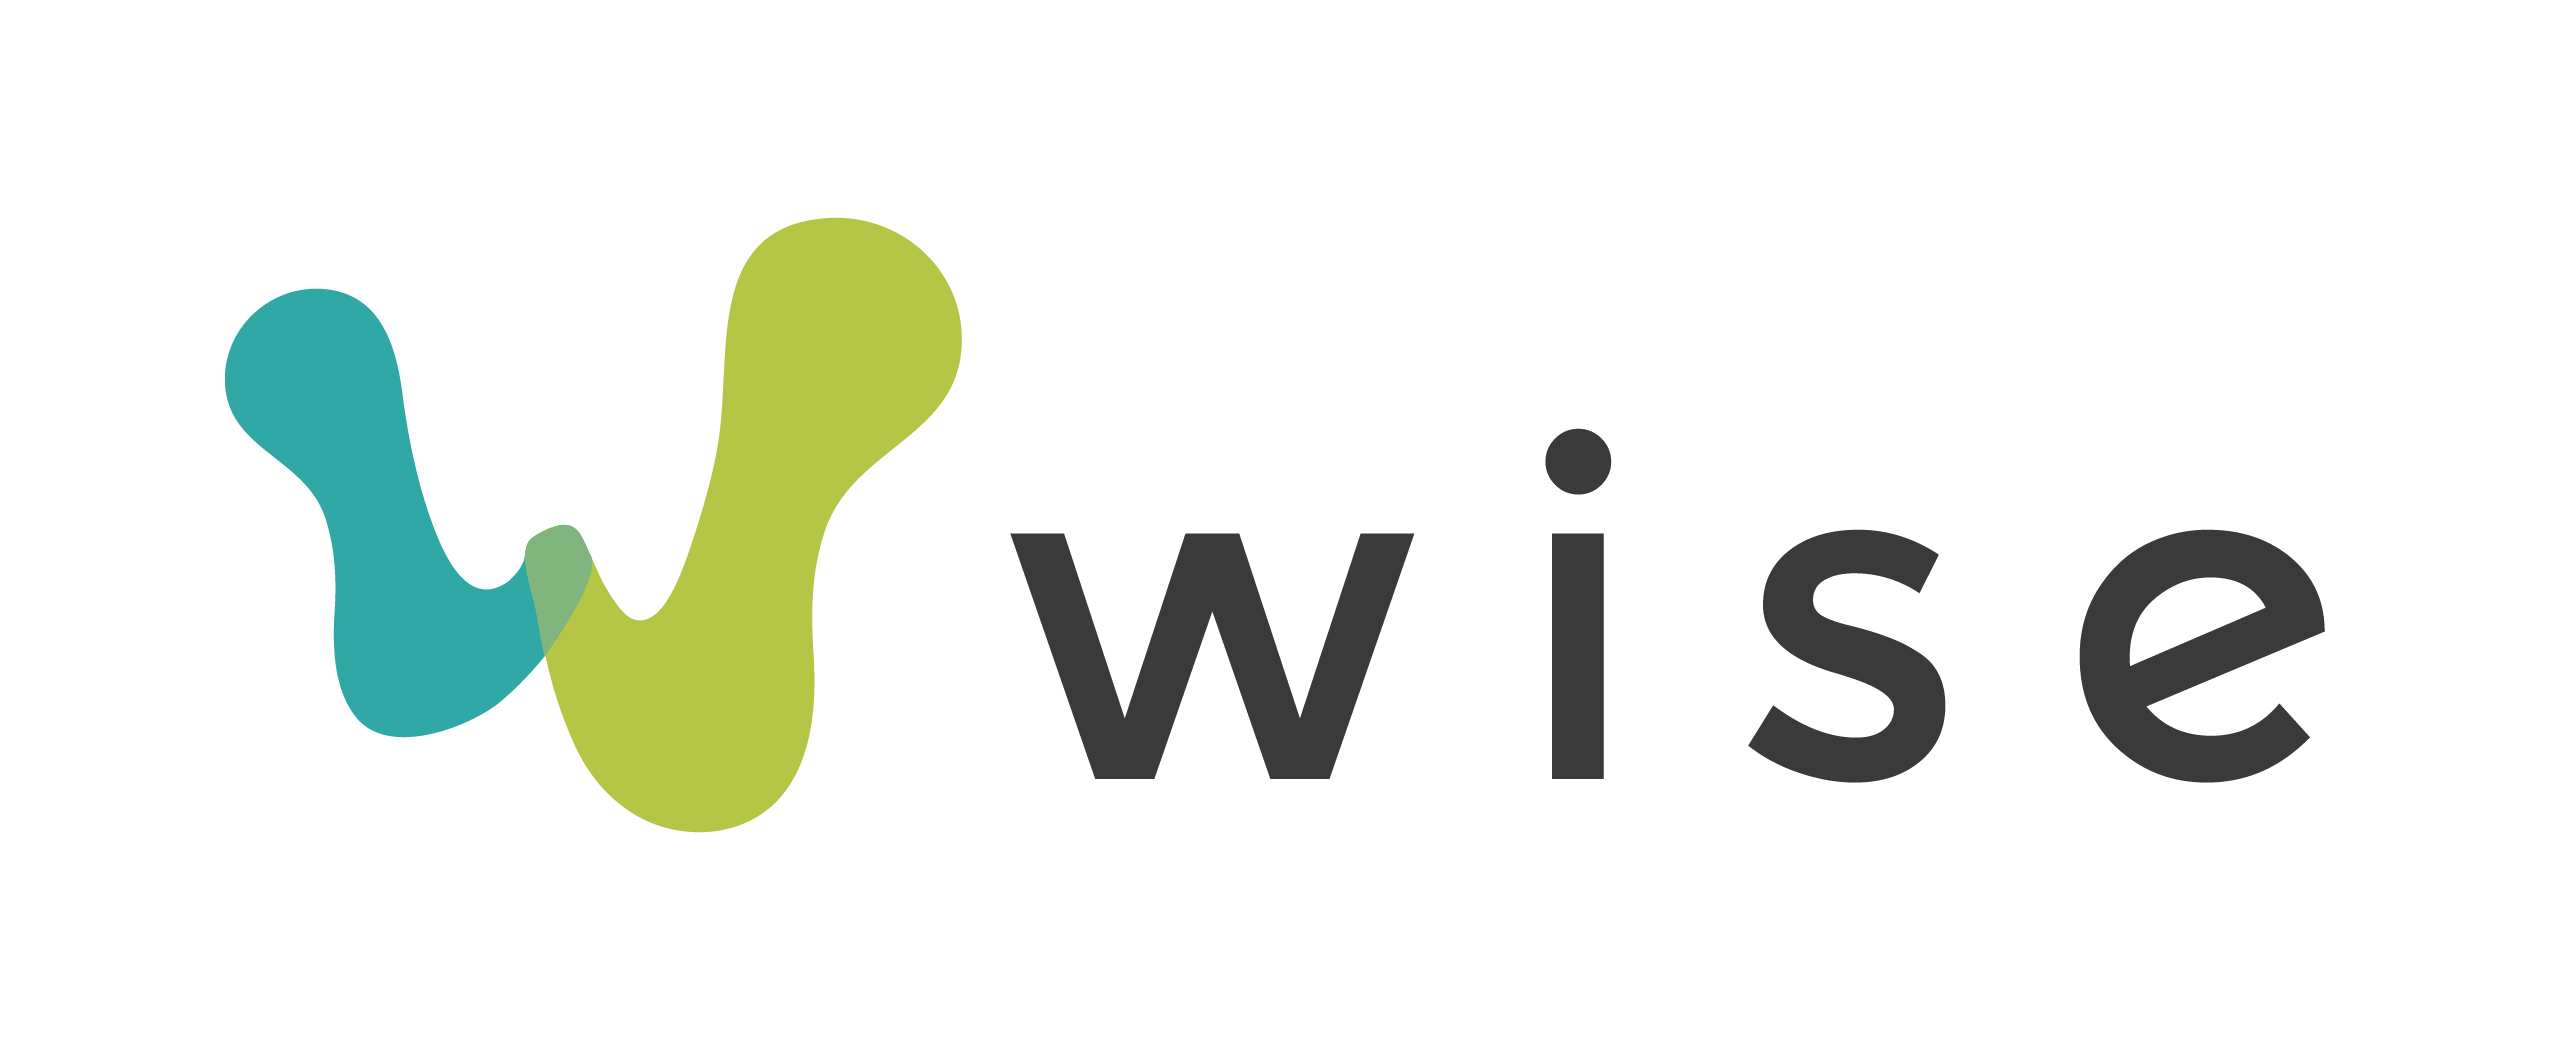 Wise Logo - Wise Events | Wise